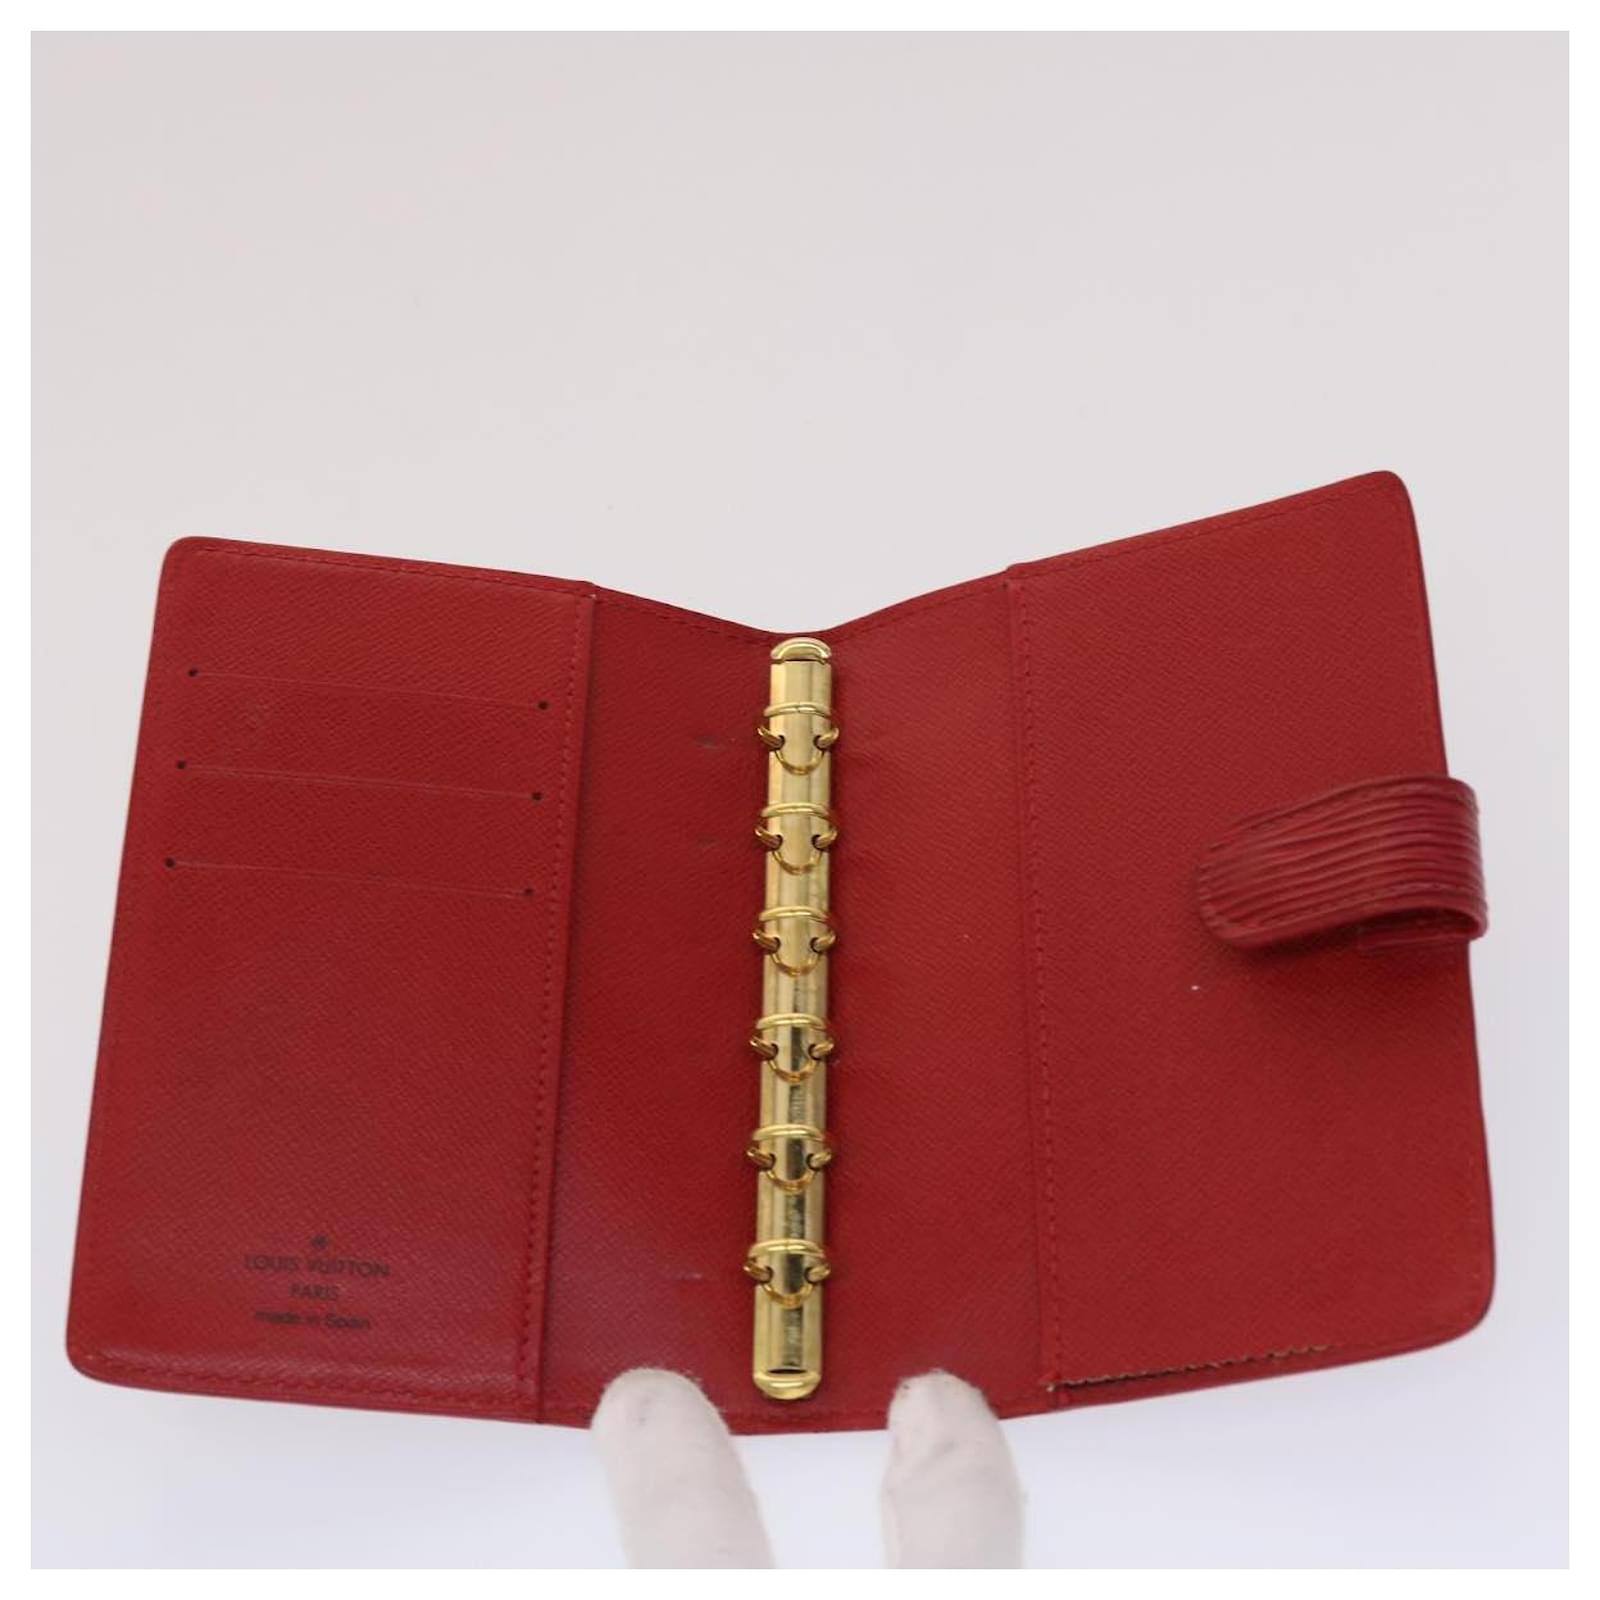 LOUIS VUITTON Epi Agenda PM Day Planner Cover Red R20057 LV Auth